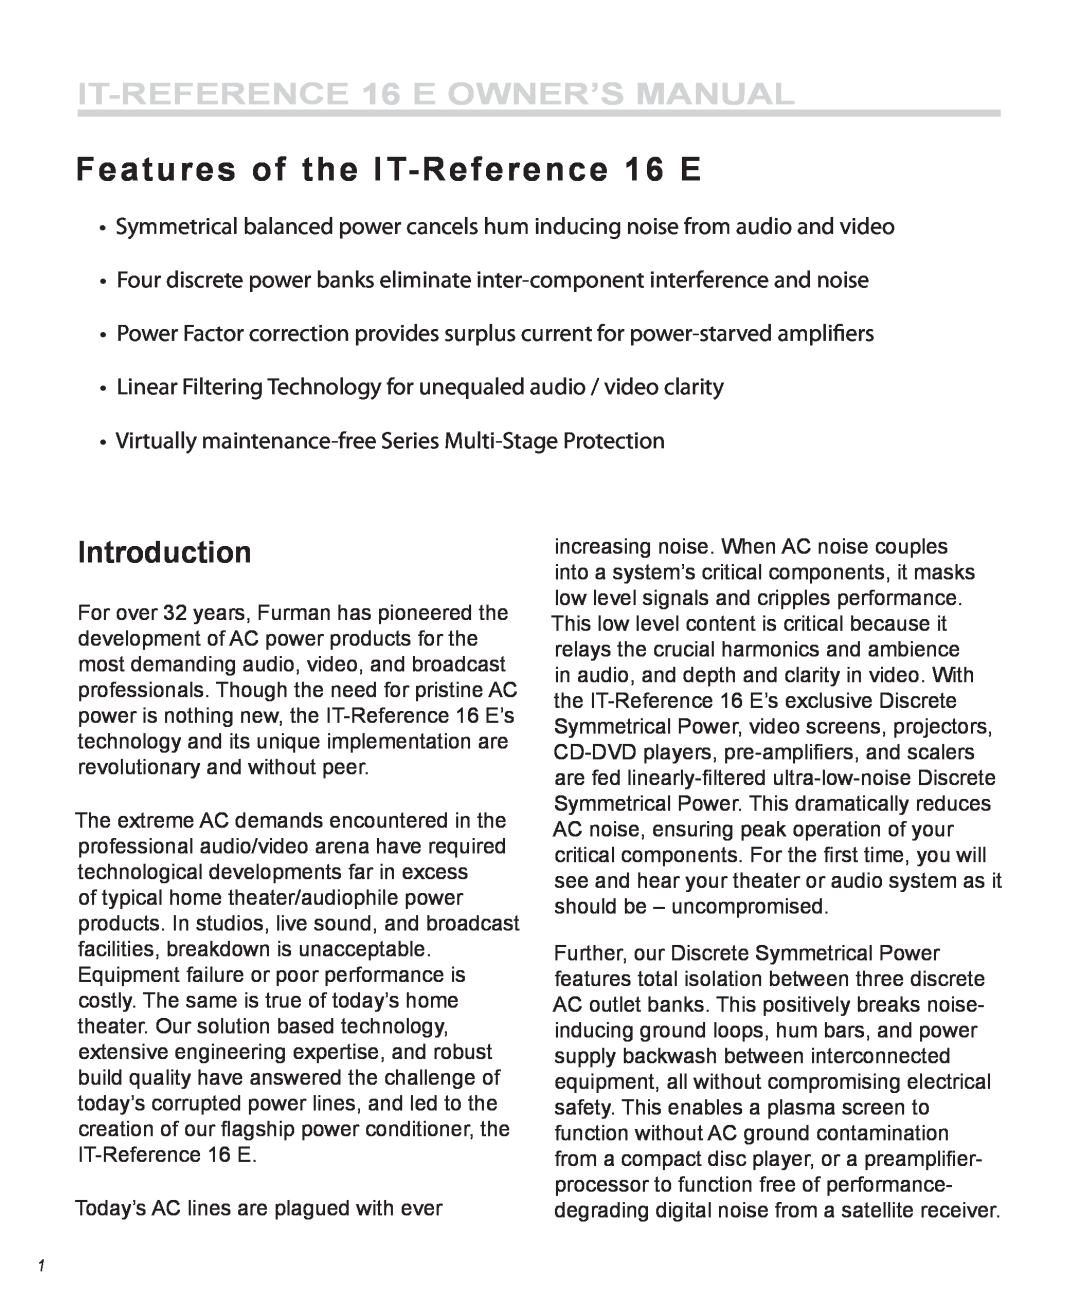 Furman Sound owner manual Introduction, Features of the IT-Reference 16 E, IT-REFERENCE 16 E owner’s manual 